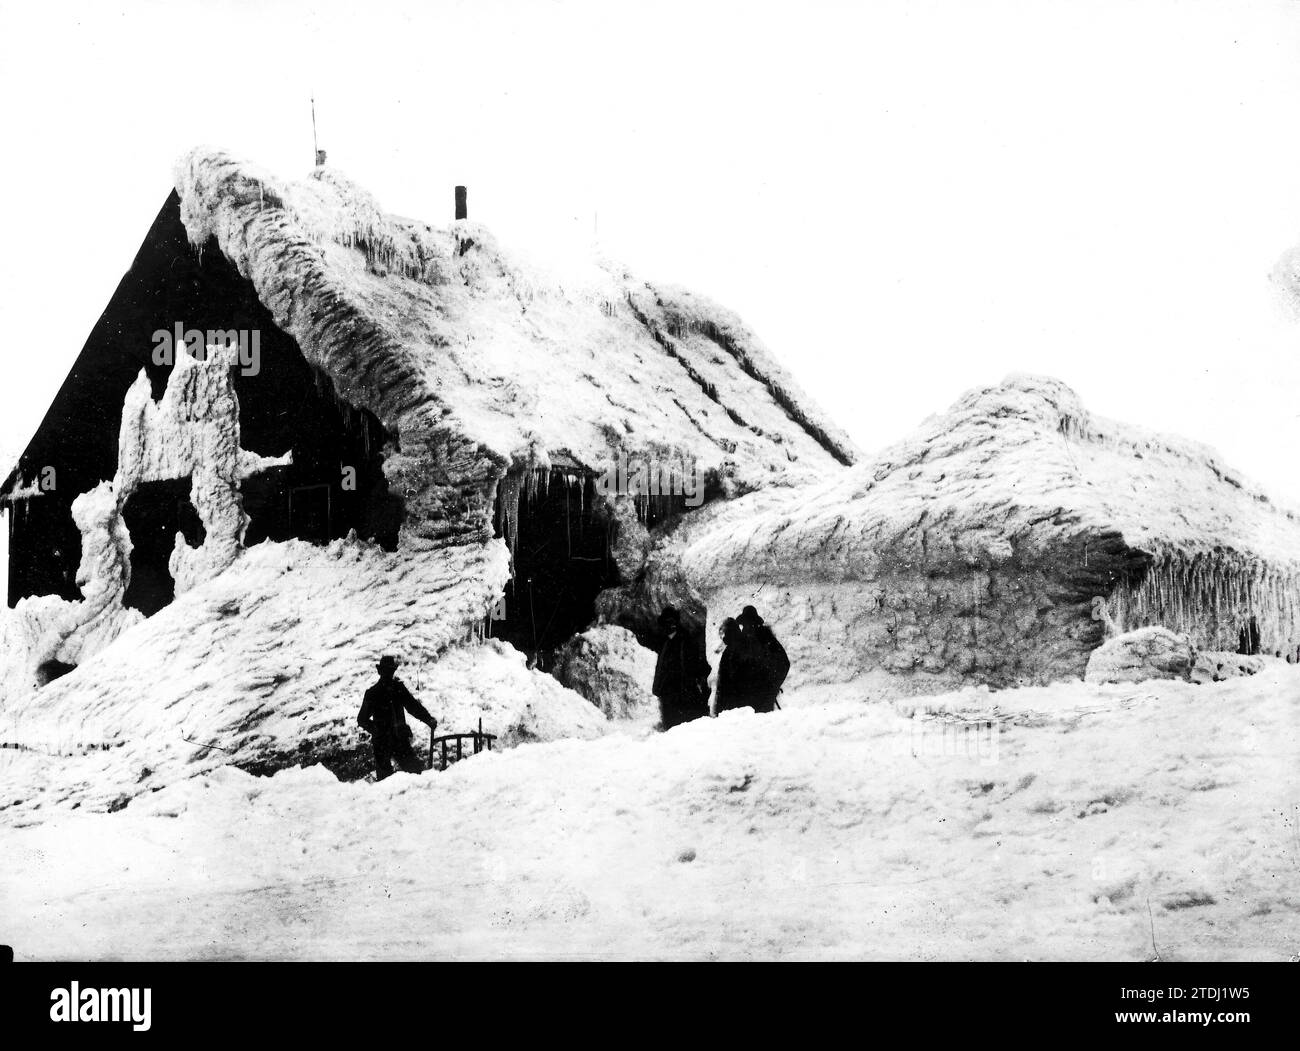 12/31/1909. Winter in the Riesengebirge. A mountain house buried under snow and ice. Credit: Album / Archivo ABC / Argus Stock Photo